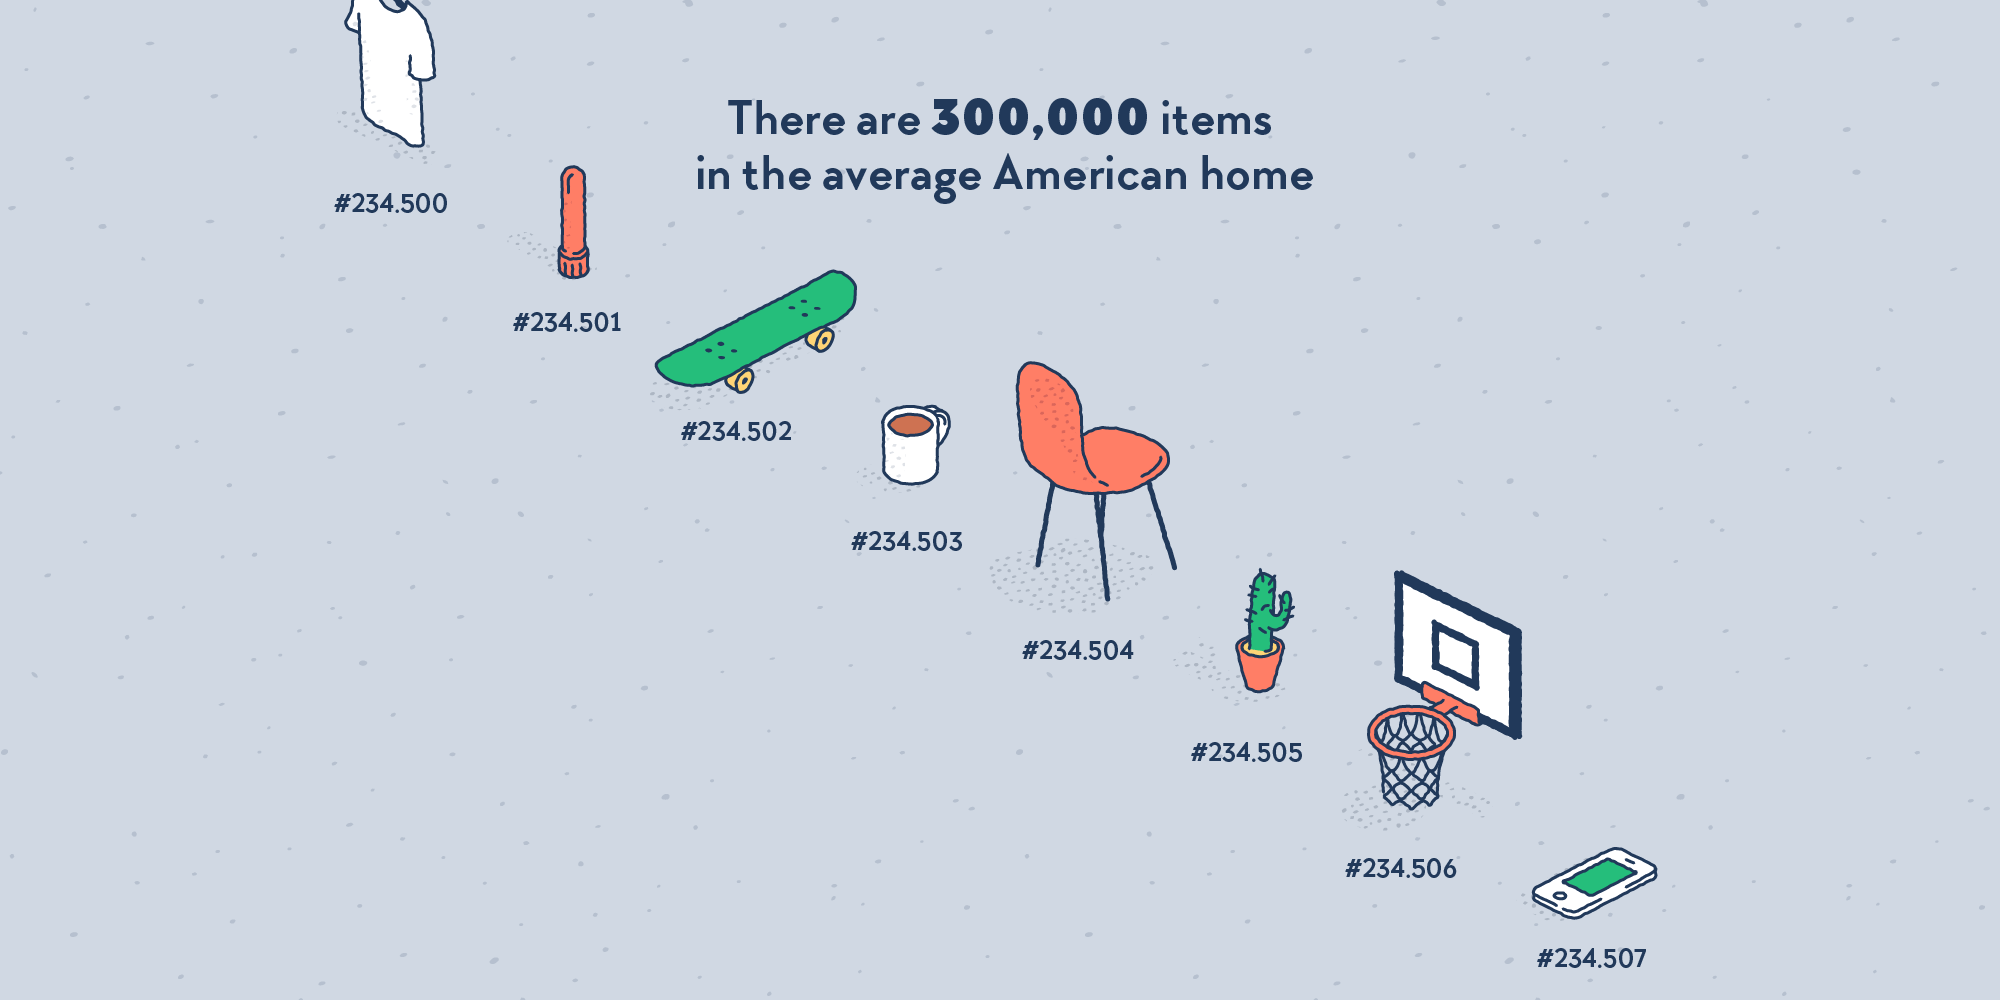 A long row of objects you can find in a household, including a chair, a skateboard, a coffee cup, a sex toy, a cactus, and a basketball hoop.